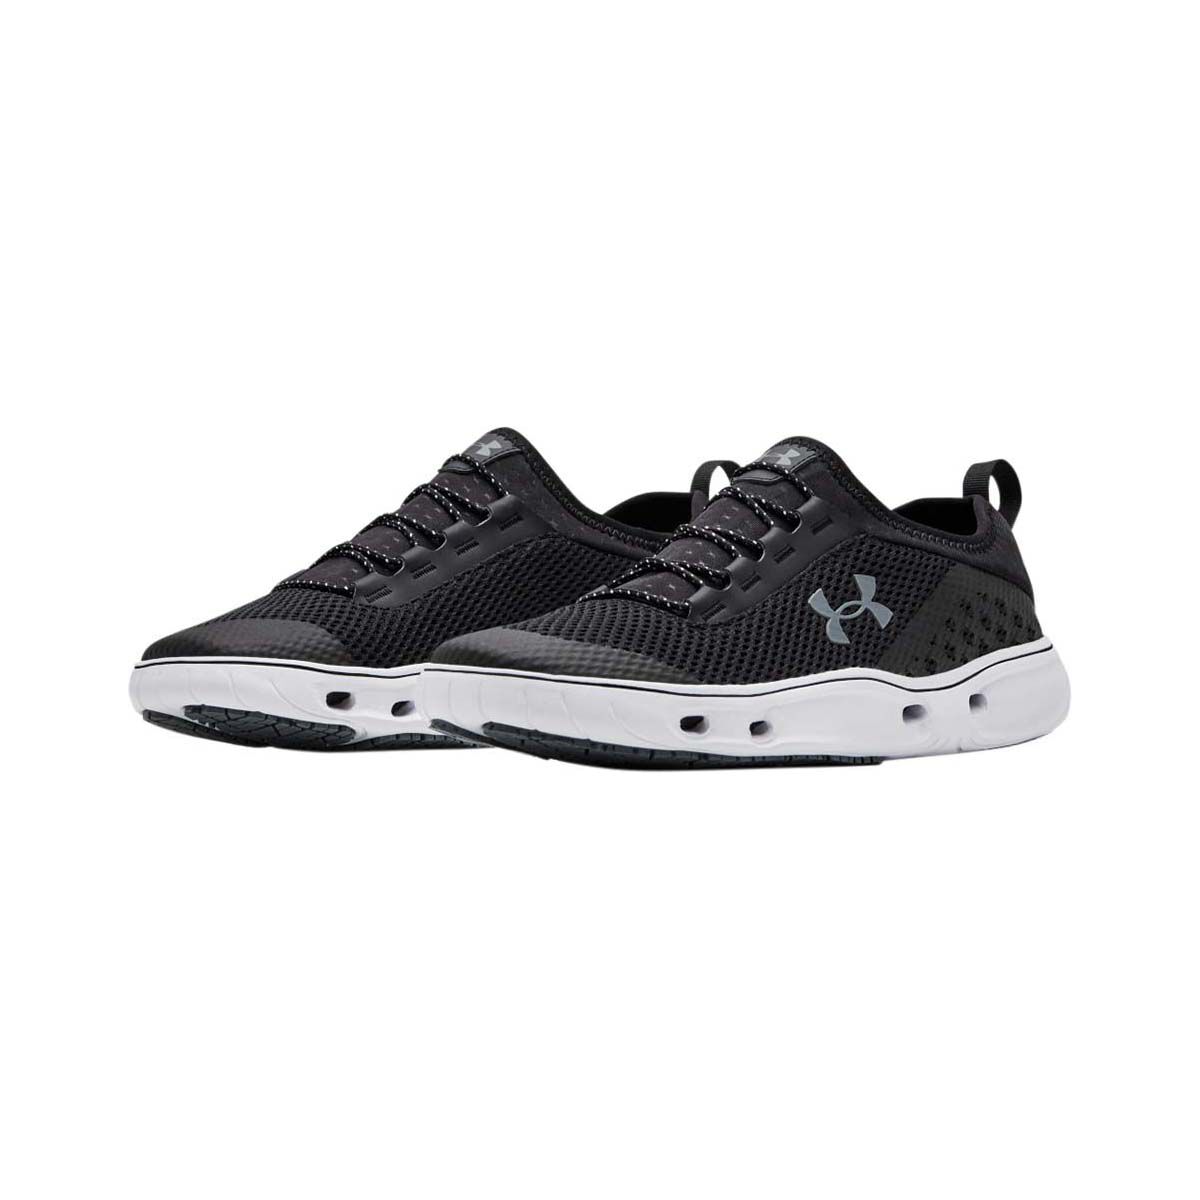 under armour shoes grey and black